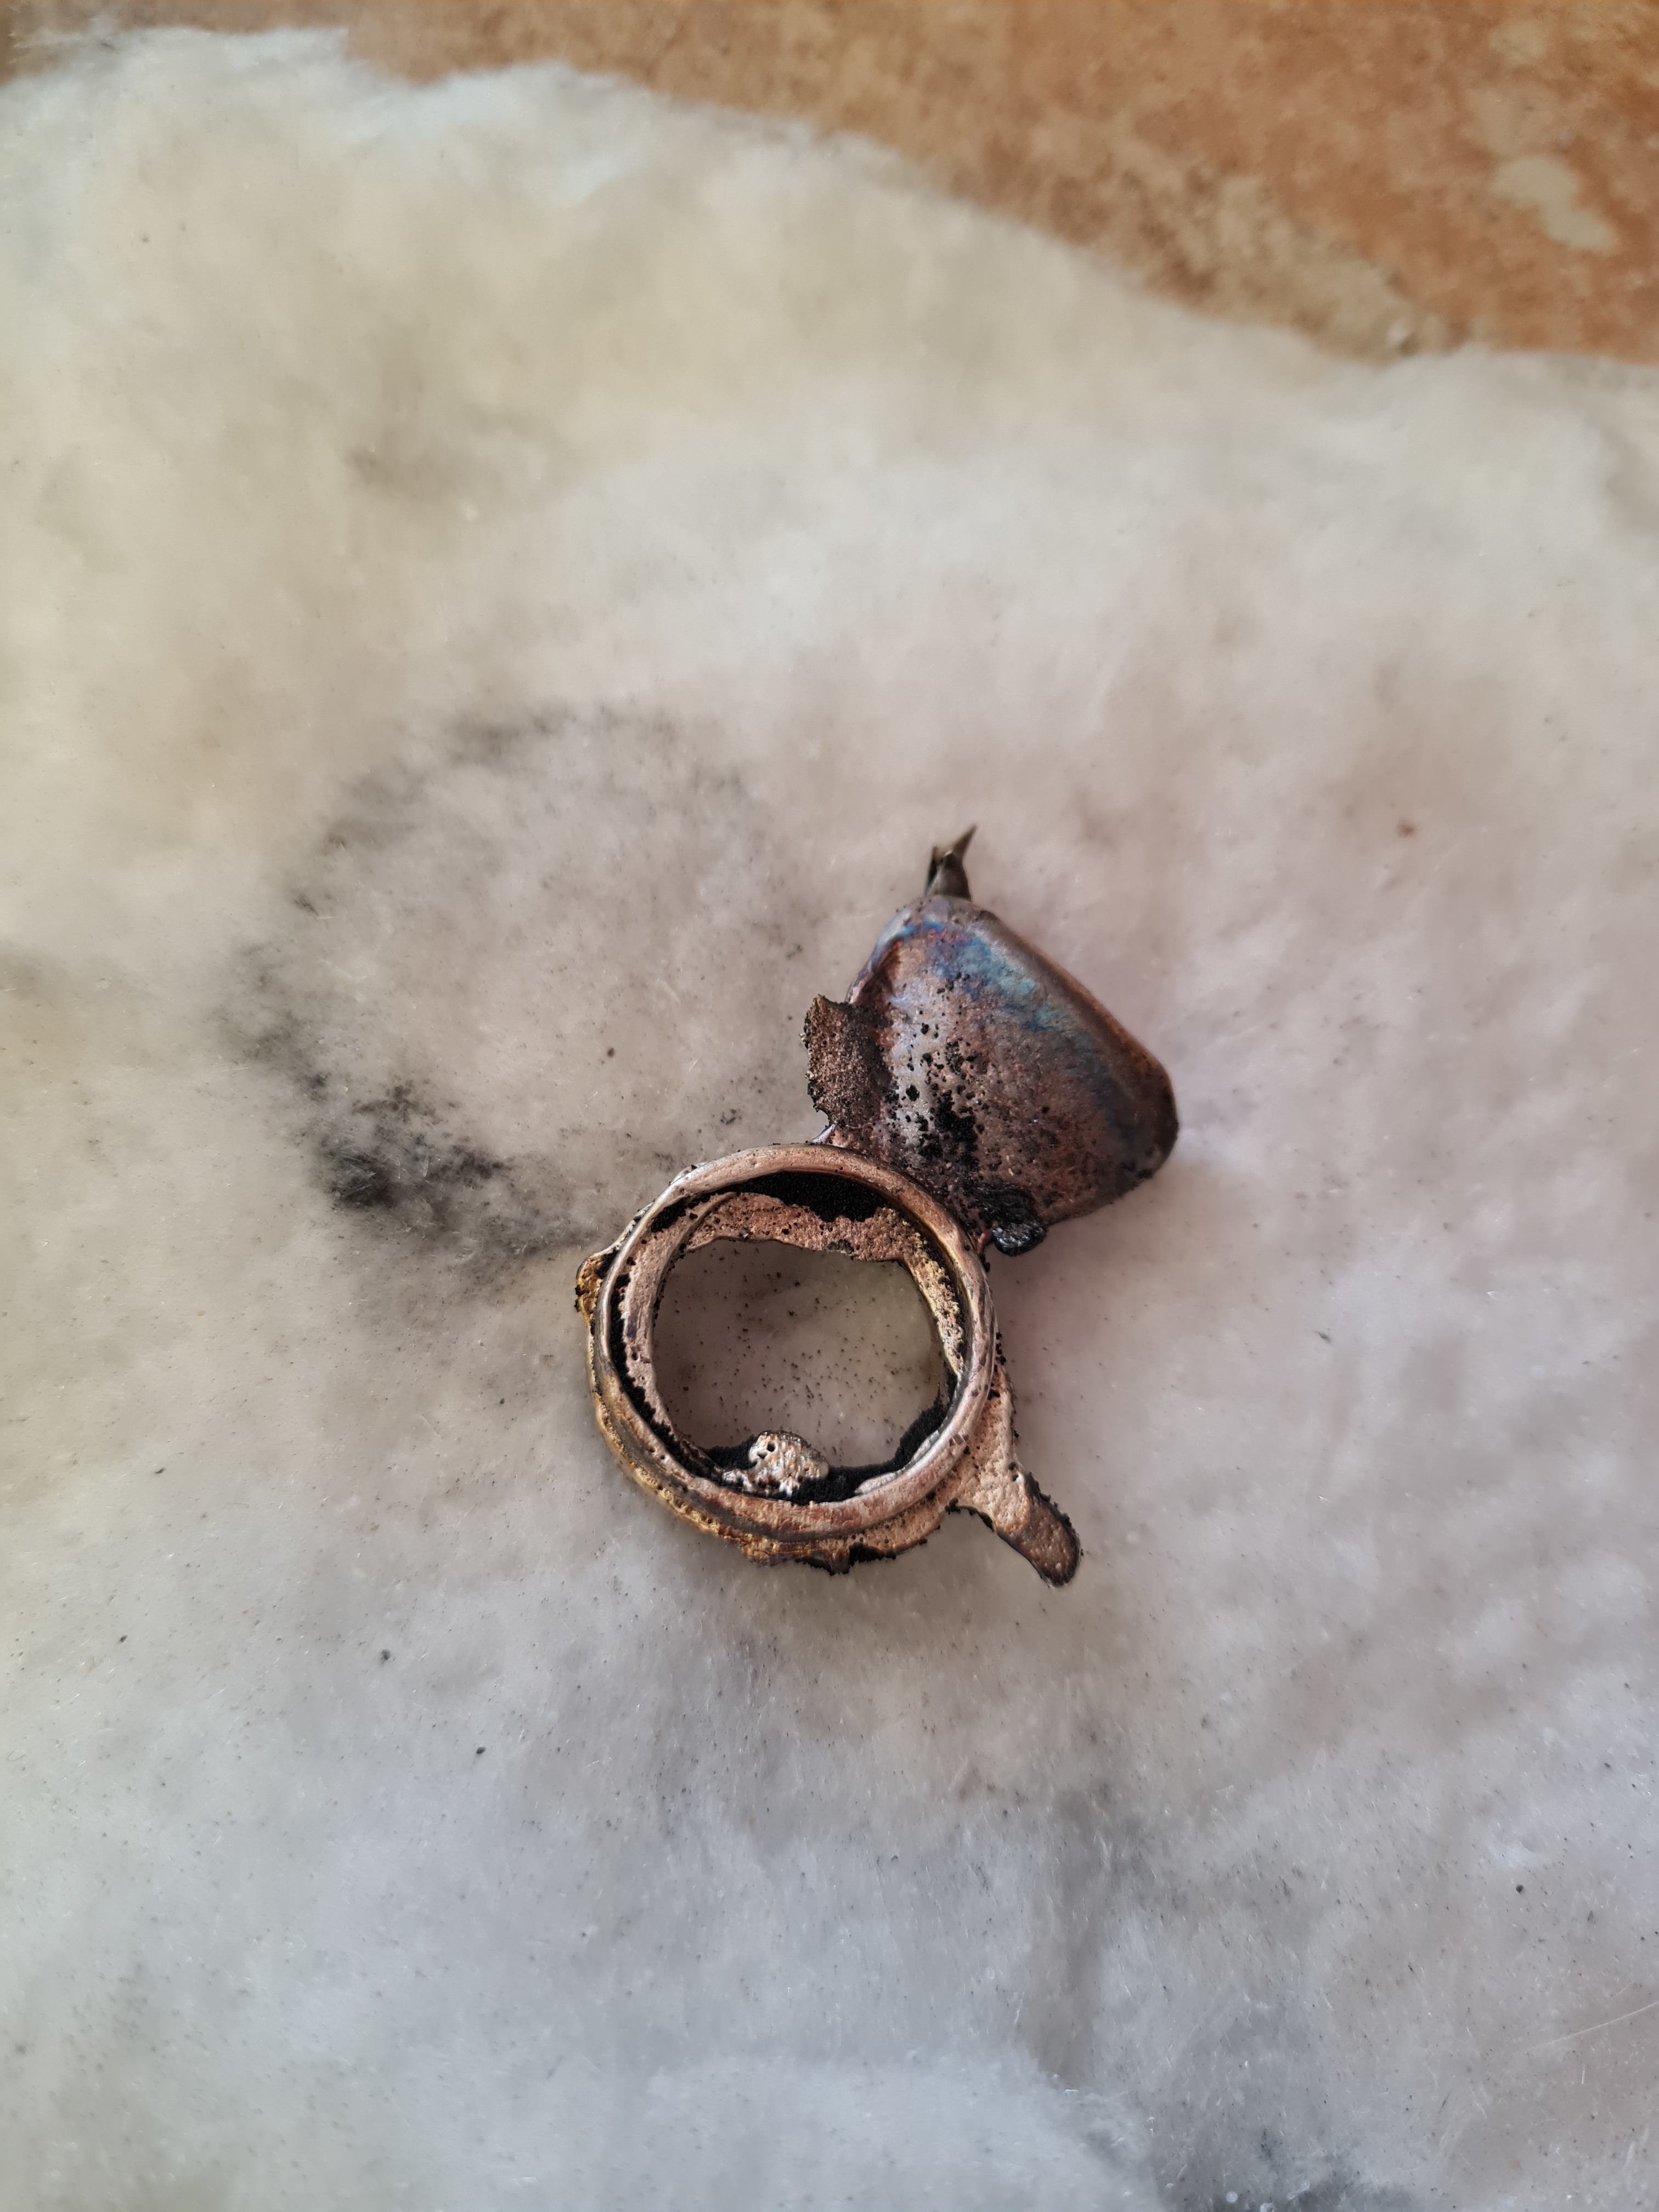 Any advice on how to prevent this? Delft clay : r/Silvercasting